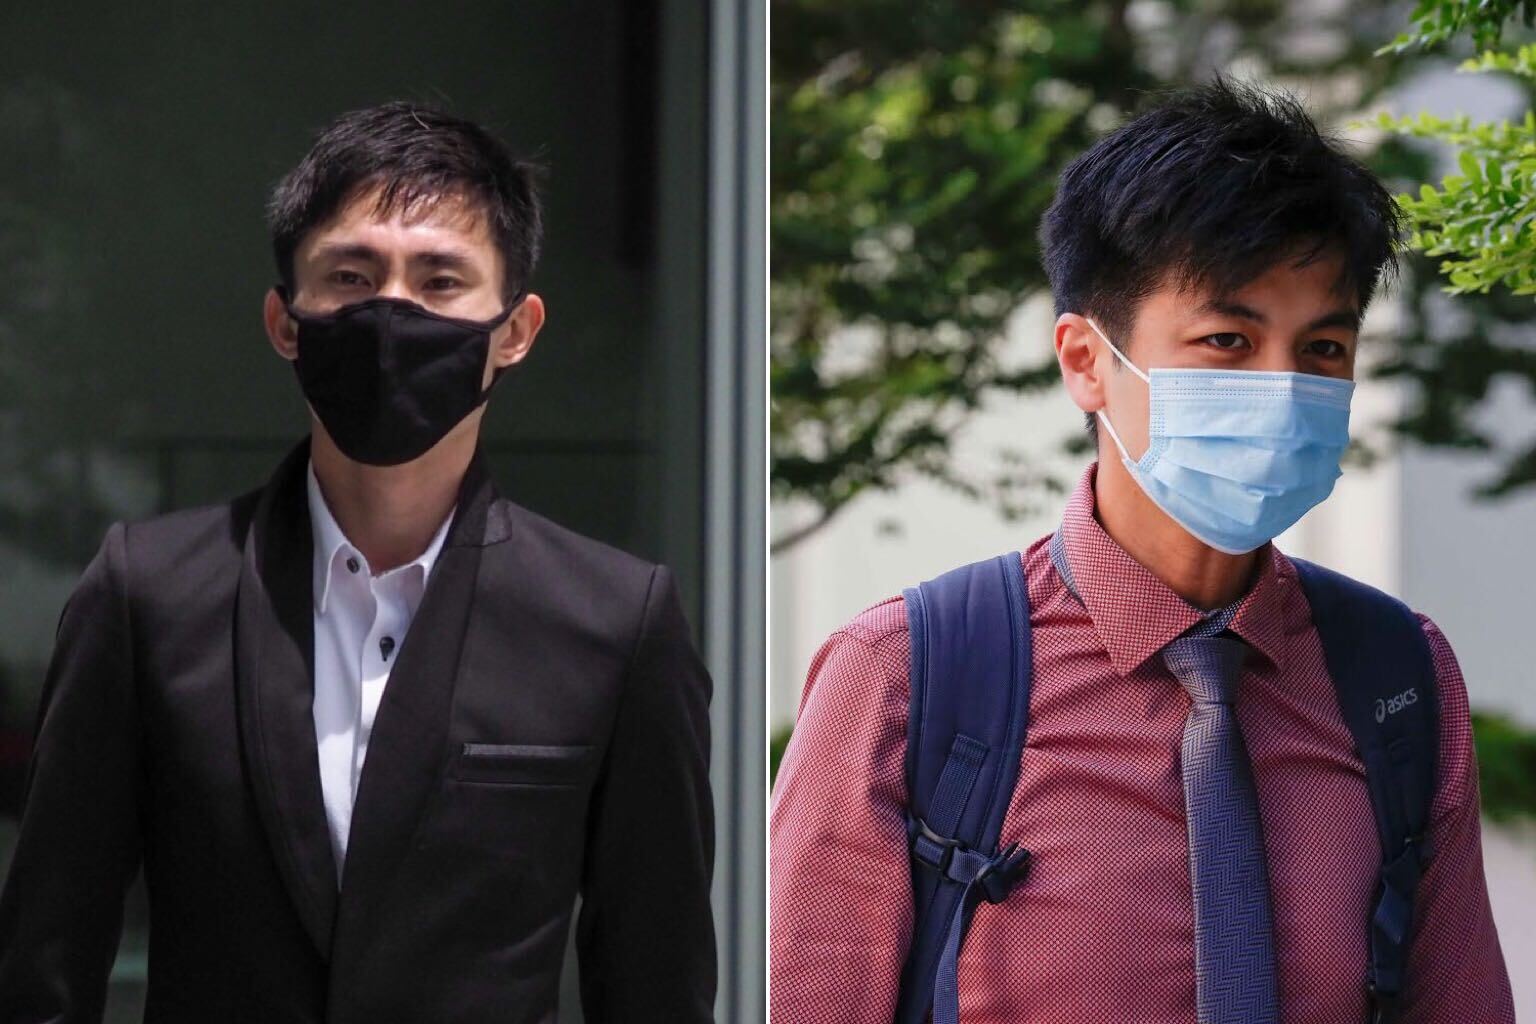 Dr Ashley Liew (right) had won his defamation lawsuit against national teammate Soh Rui Yong (left) in September last year.